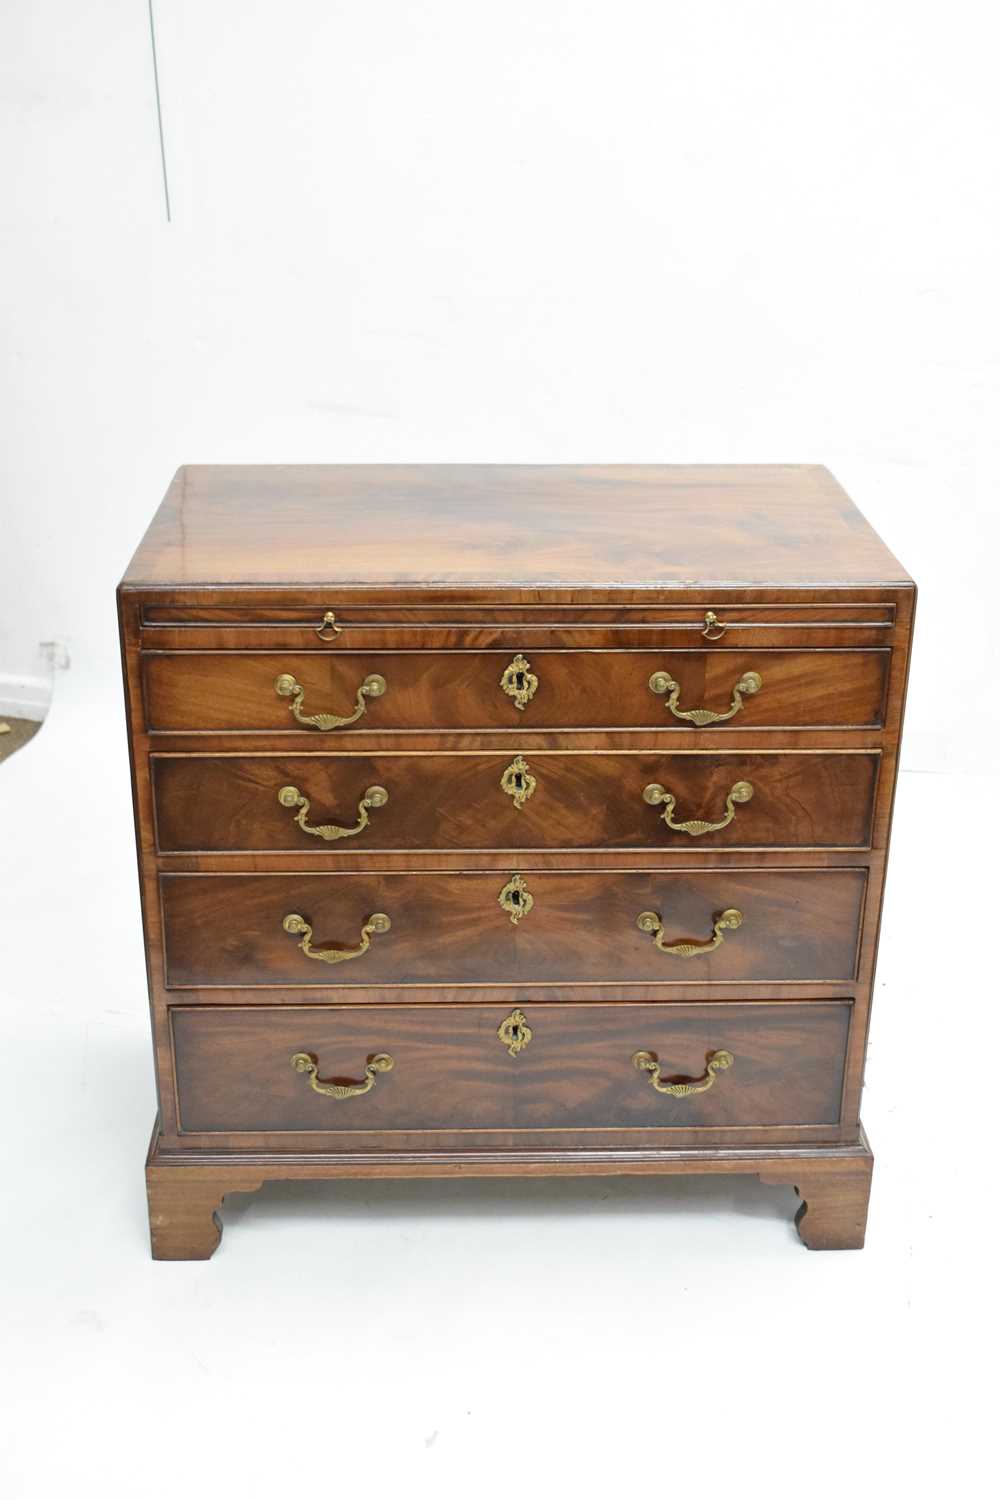 Mahogany four-drawer chest - Image 5 of 11